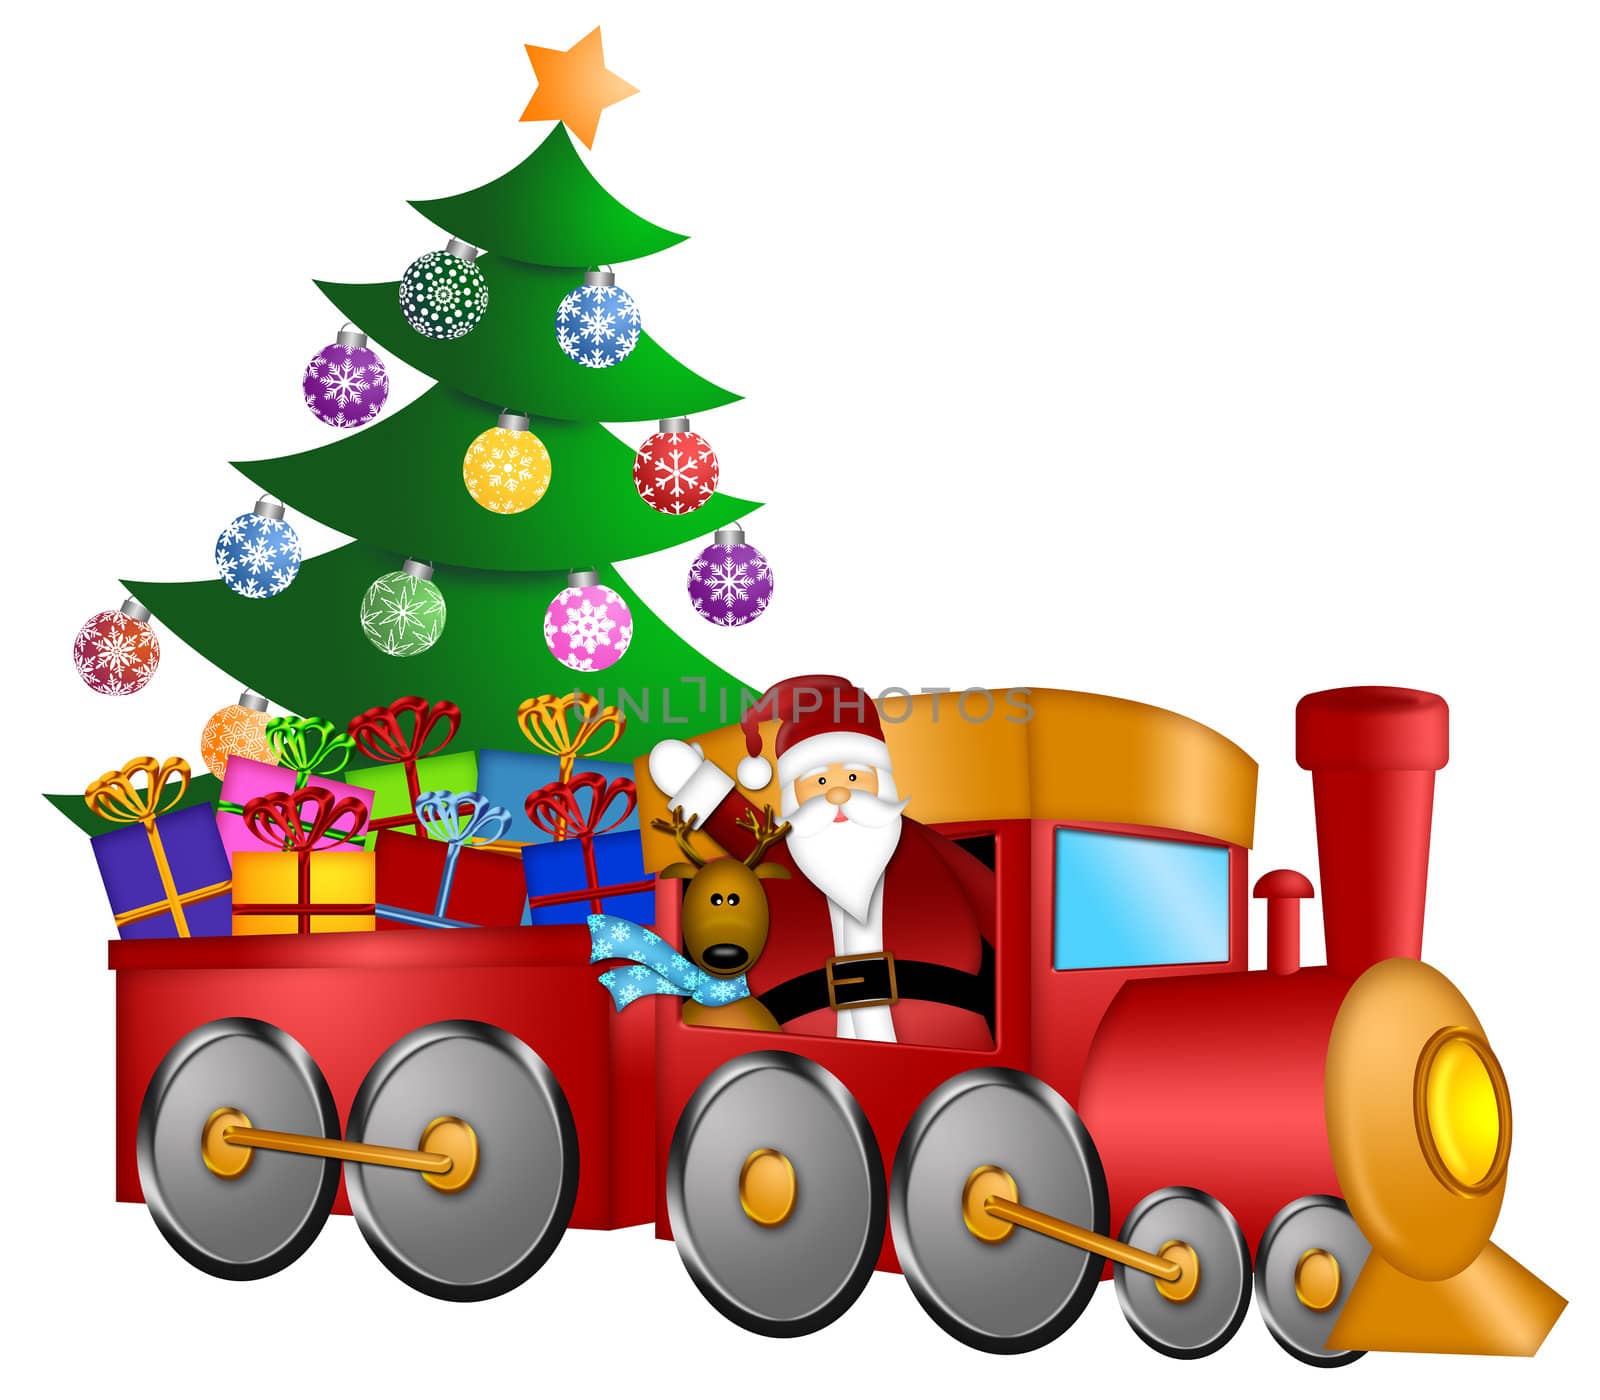 Santa in Train with Gifts and Christmas Tree by jpldesigns